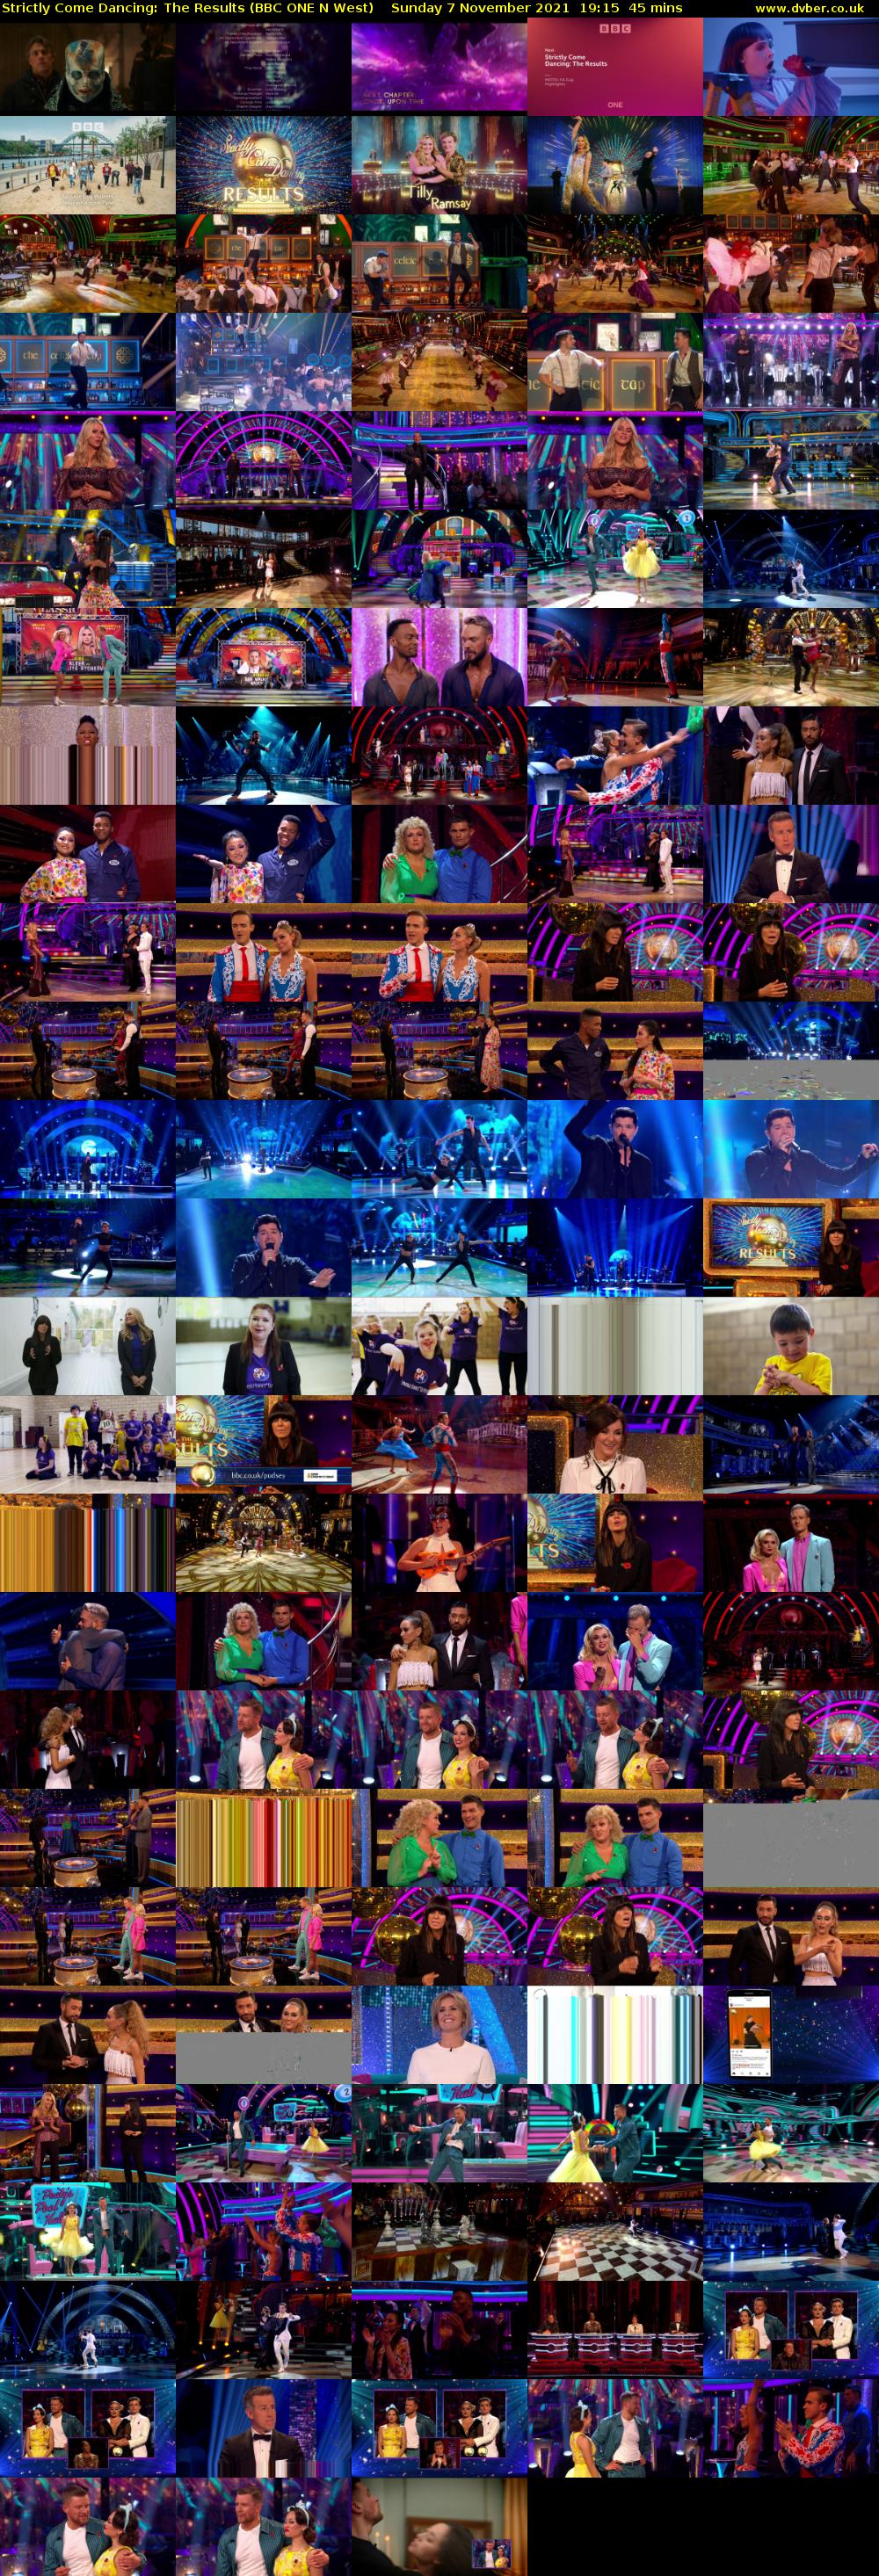 Strictly Come Dancing: The Results (BBC ONE N West) Sunday 7 November 2021 19:15 - 20:00